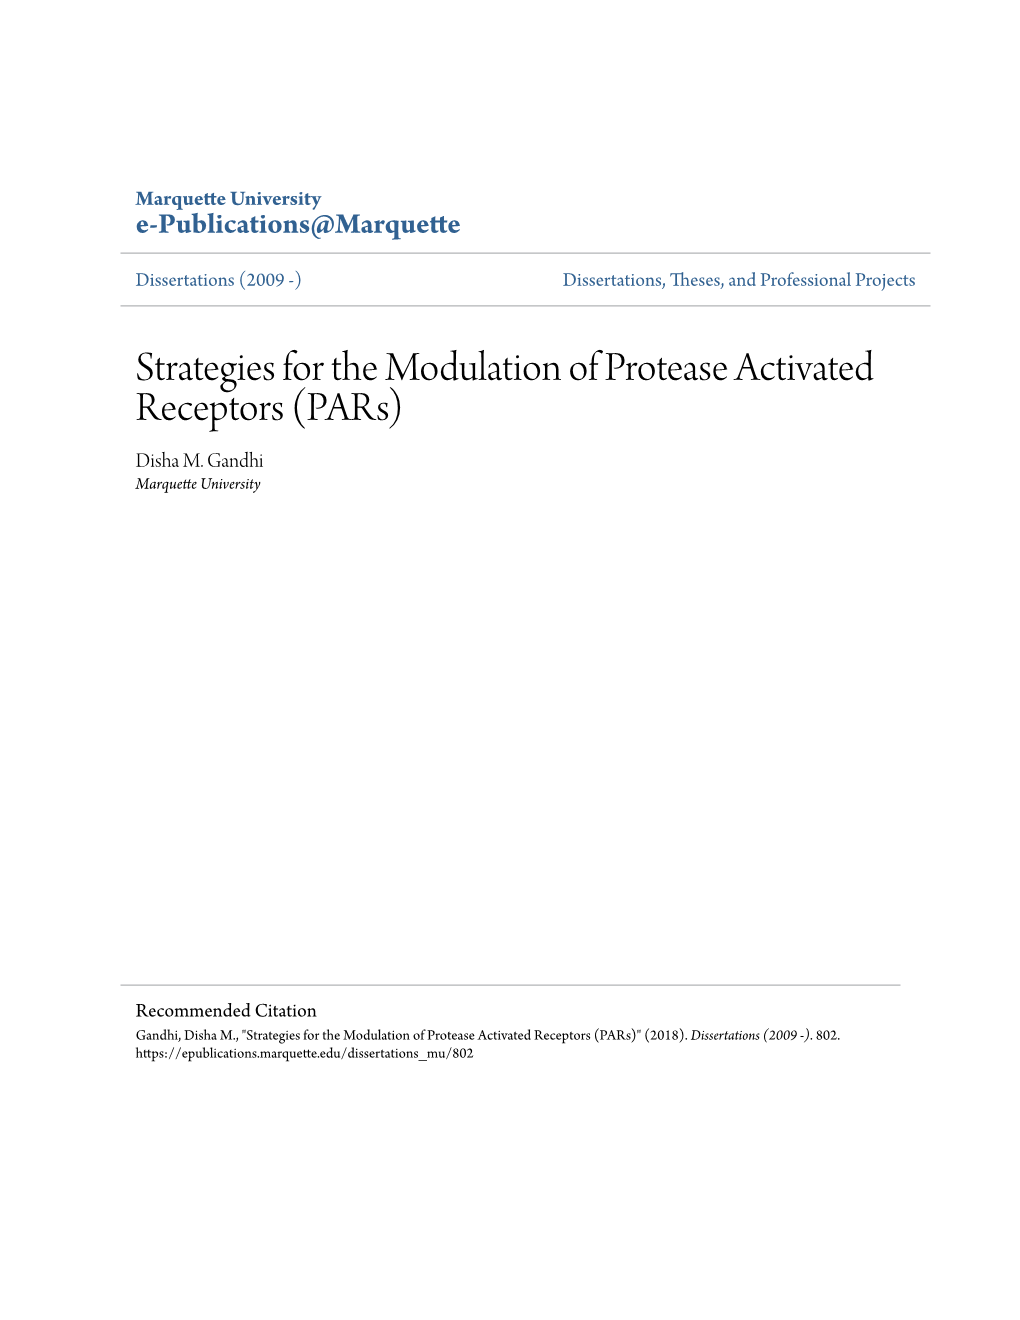 Strategies for the Modulation of Protease Activated Receptors (Pars) Disha M